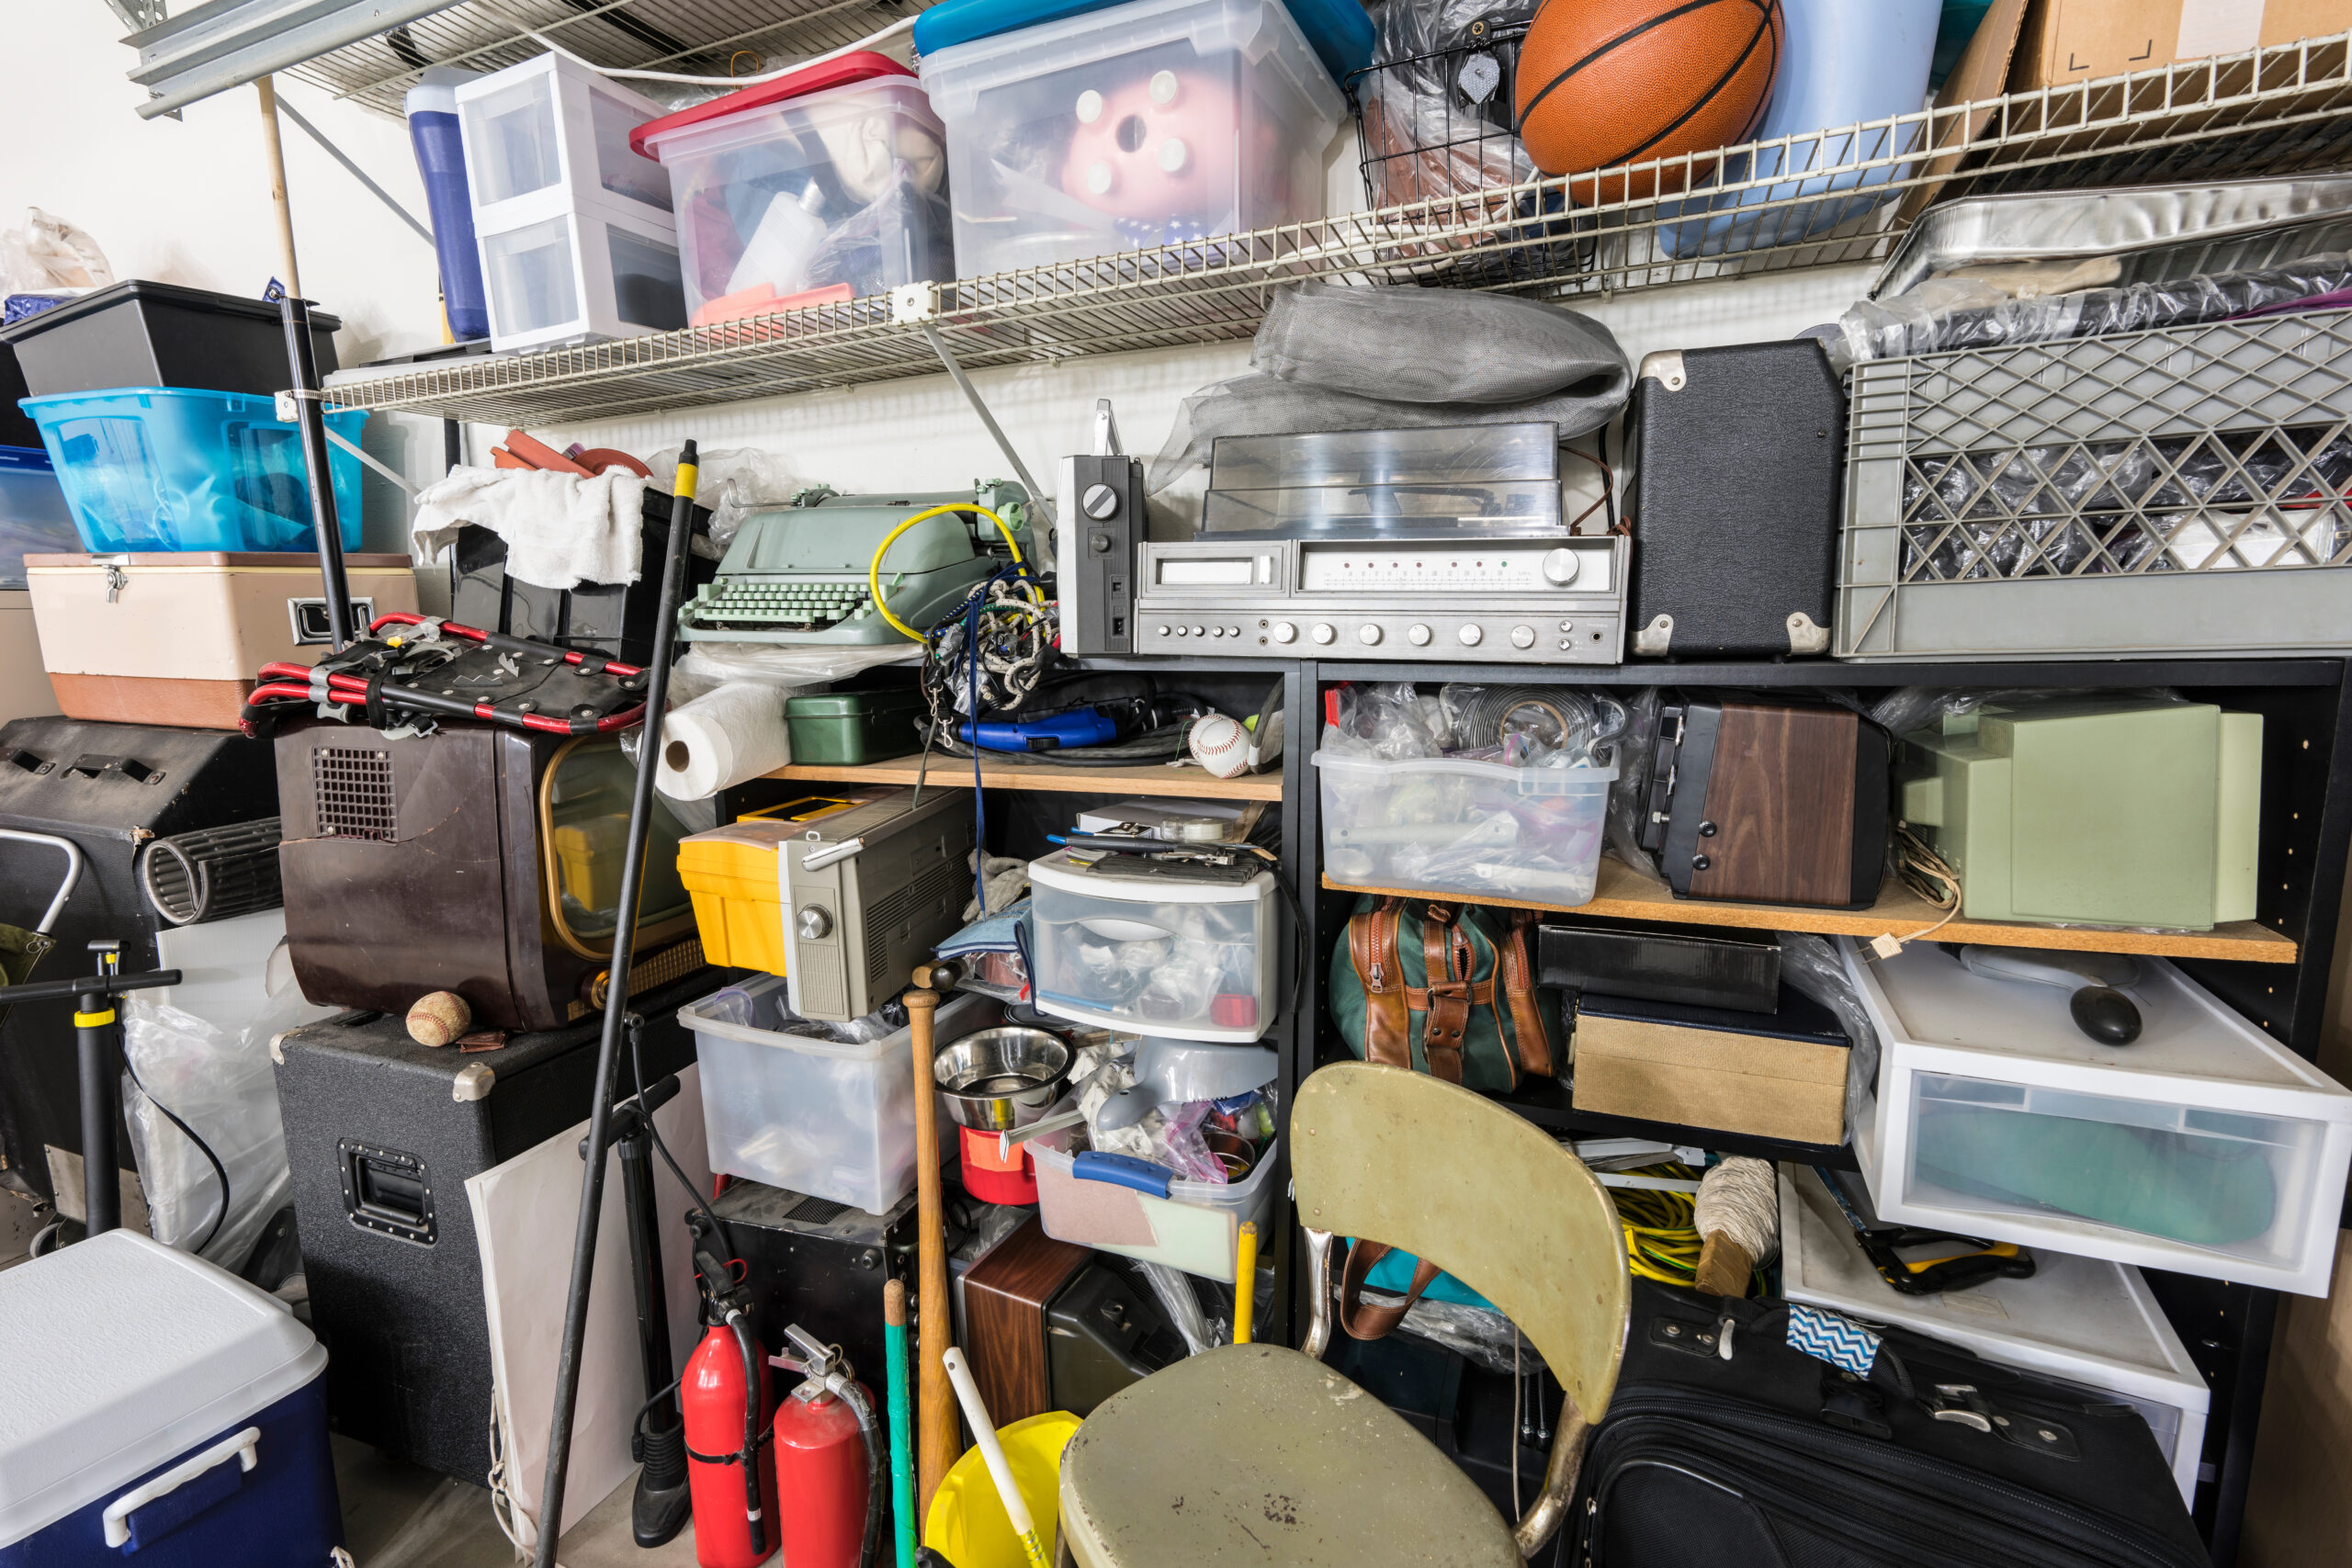 home with excessive hoarding in garage